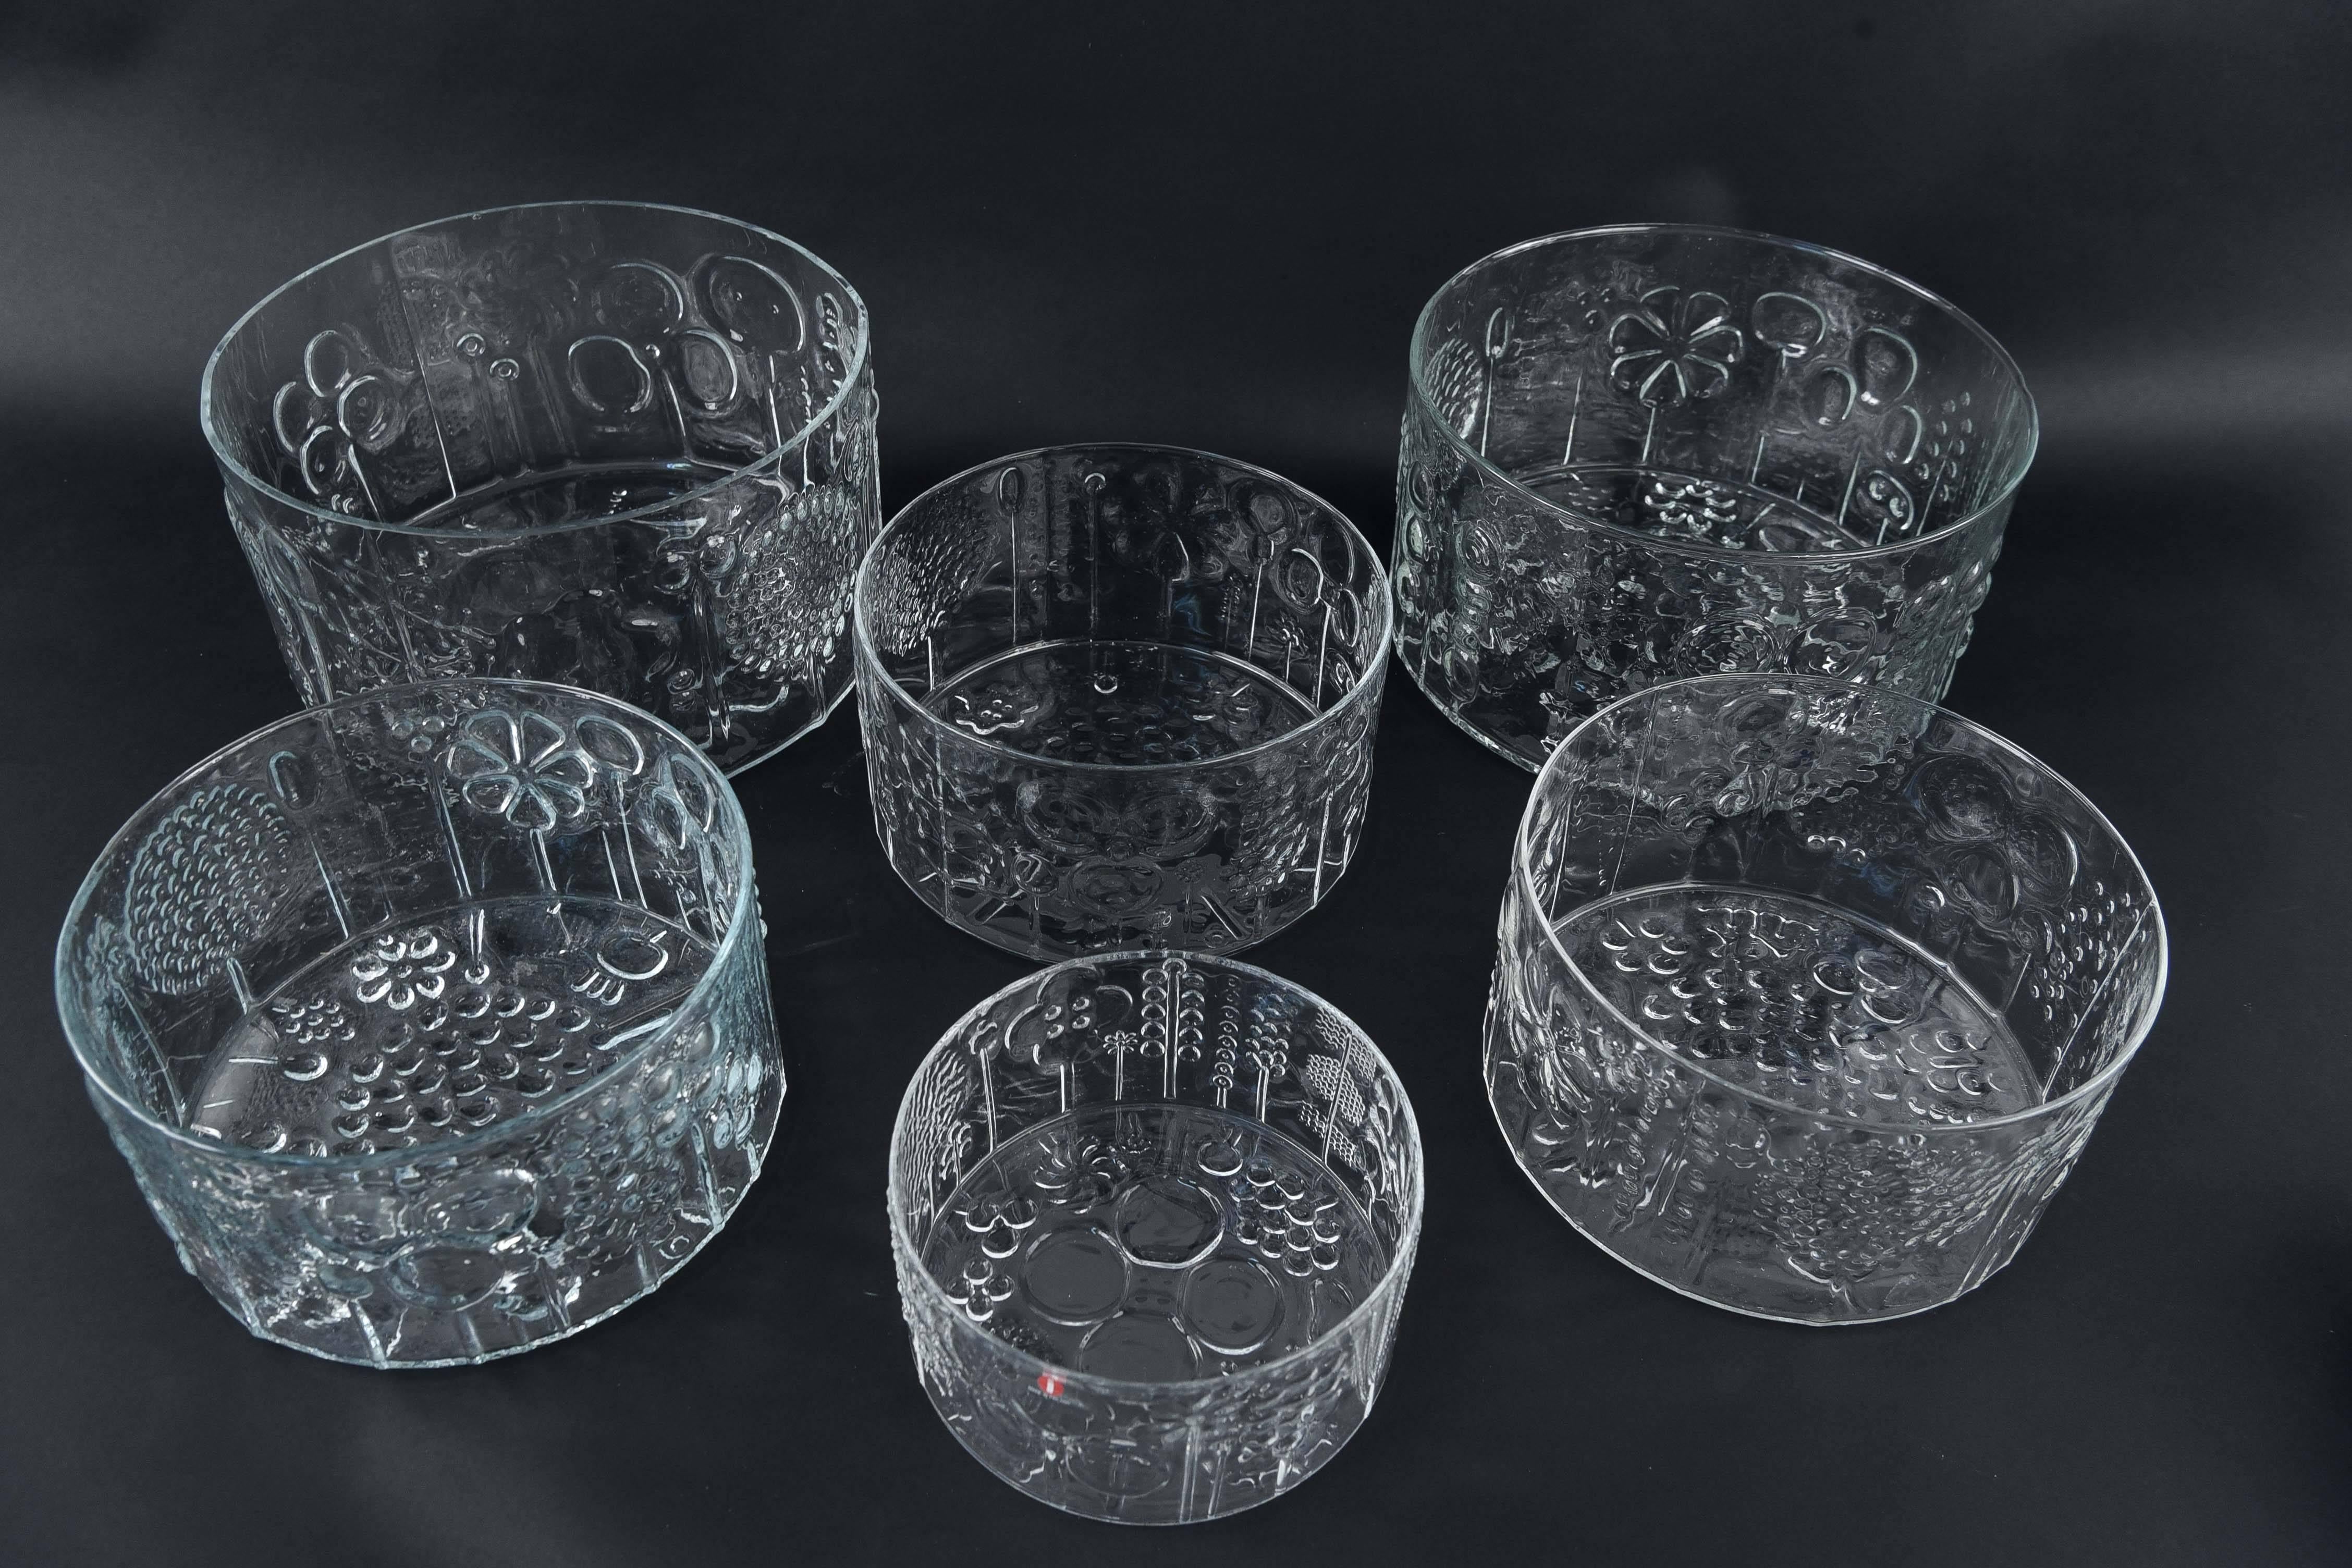 A set of six art glass bowls displaying a floral motif. Part of the Flora series by Oiva Toikka for Iittala, circa 1960s, Finland. Very charming, with multiple sizes.